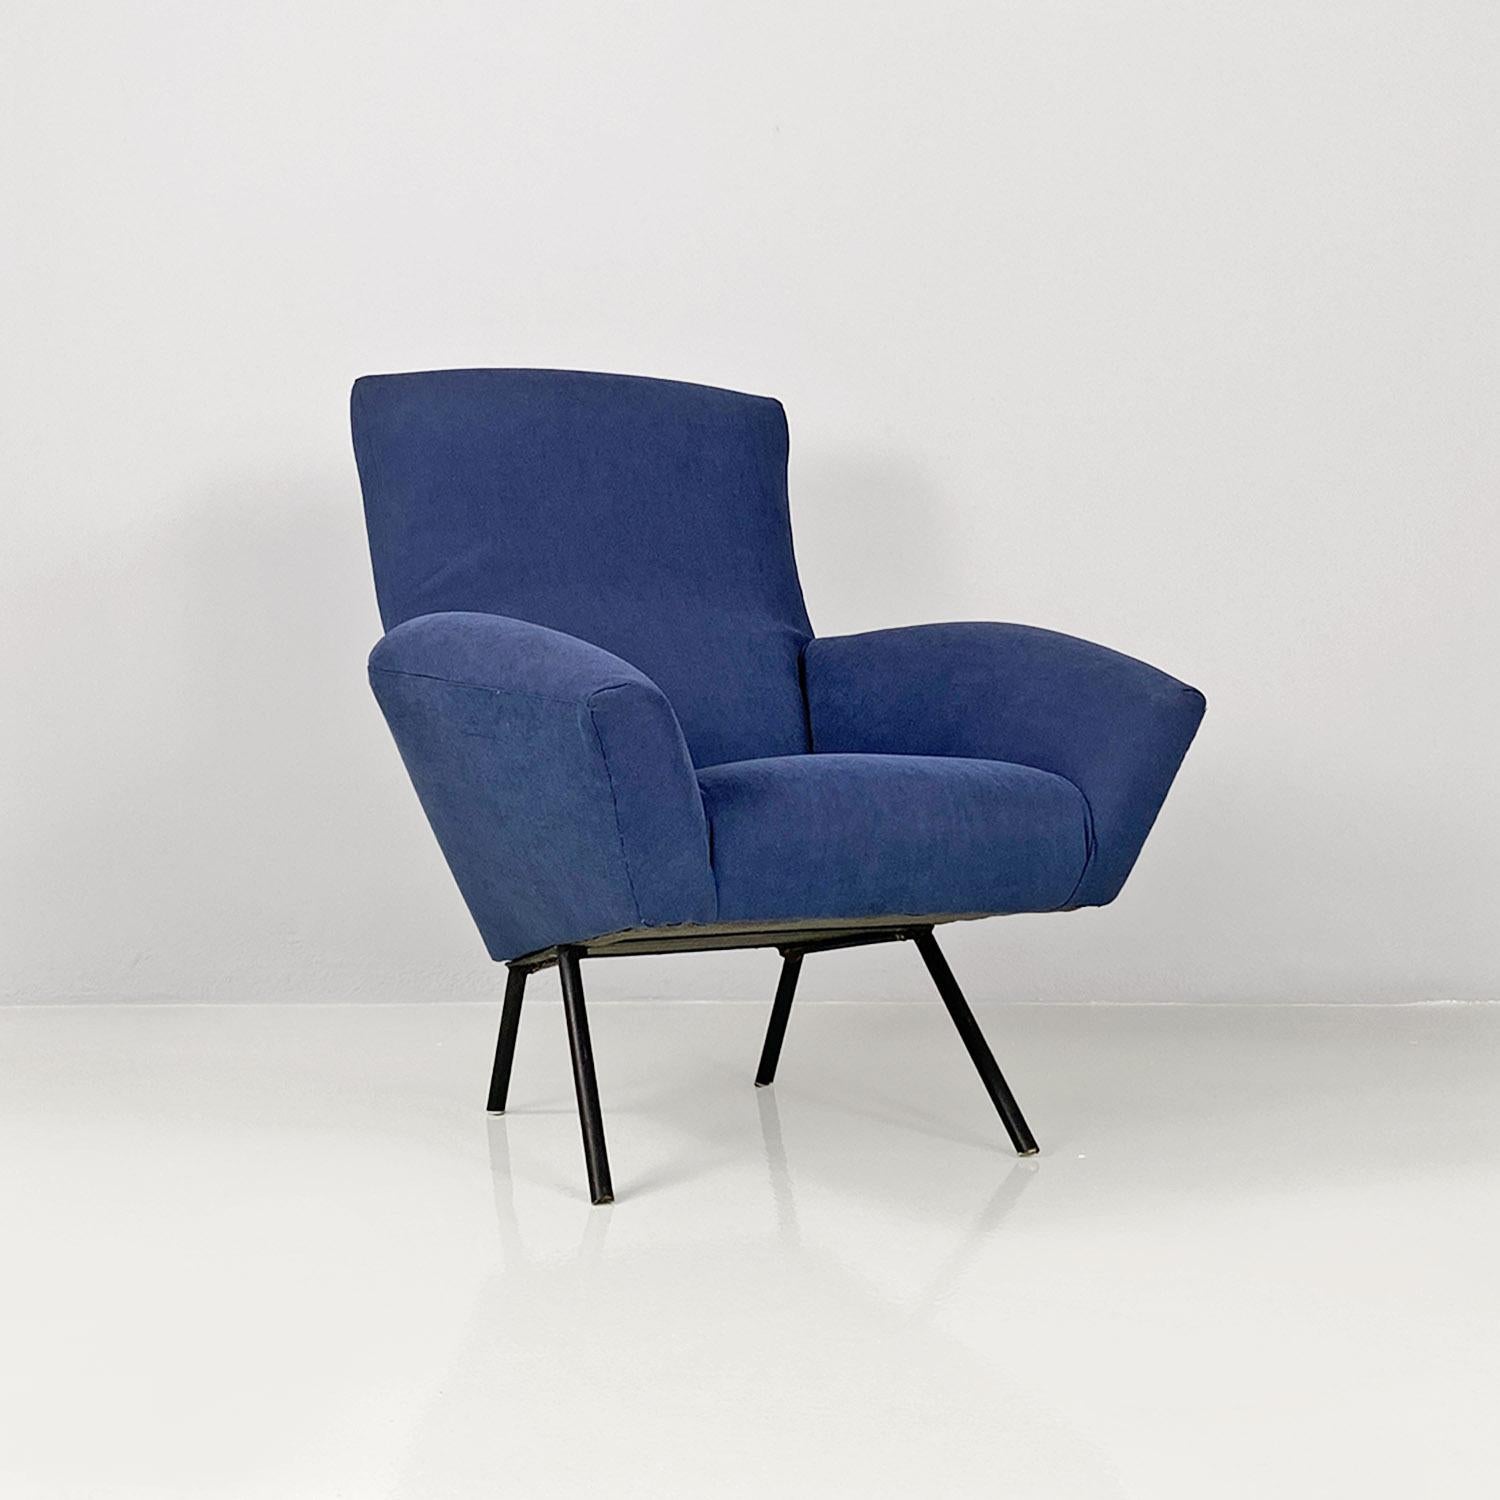 Mid-20th Century Italian mid-century modern blue fabric and black metal armchairs, 1960s For Sale